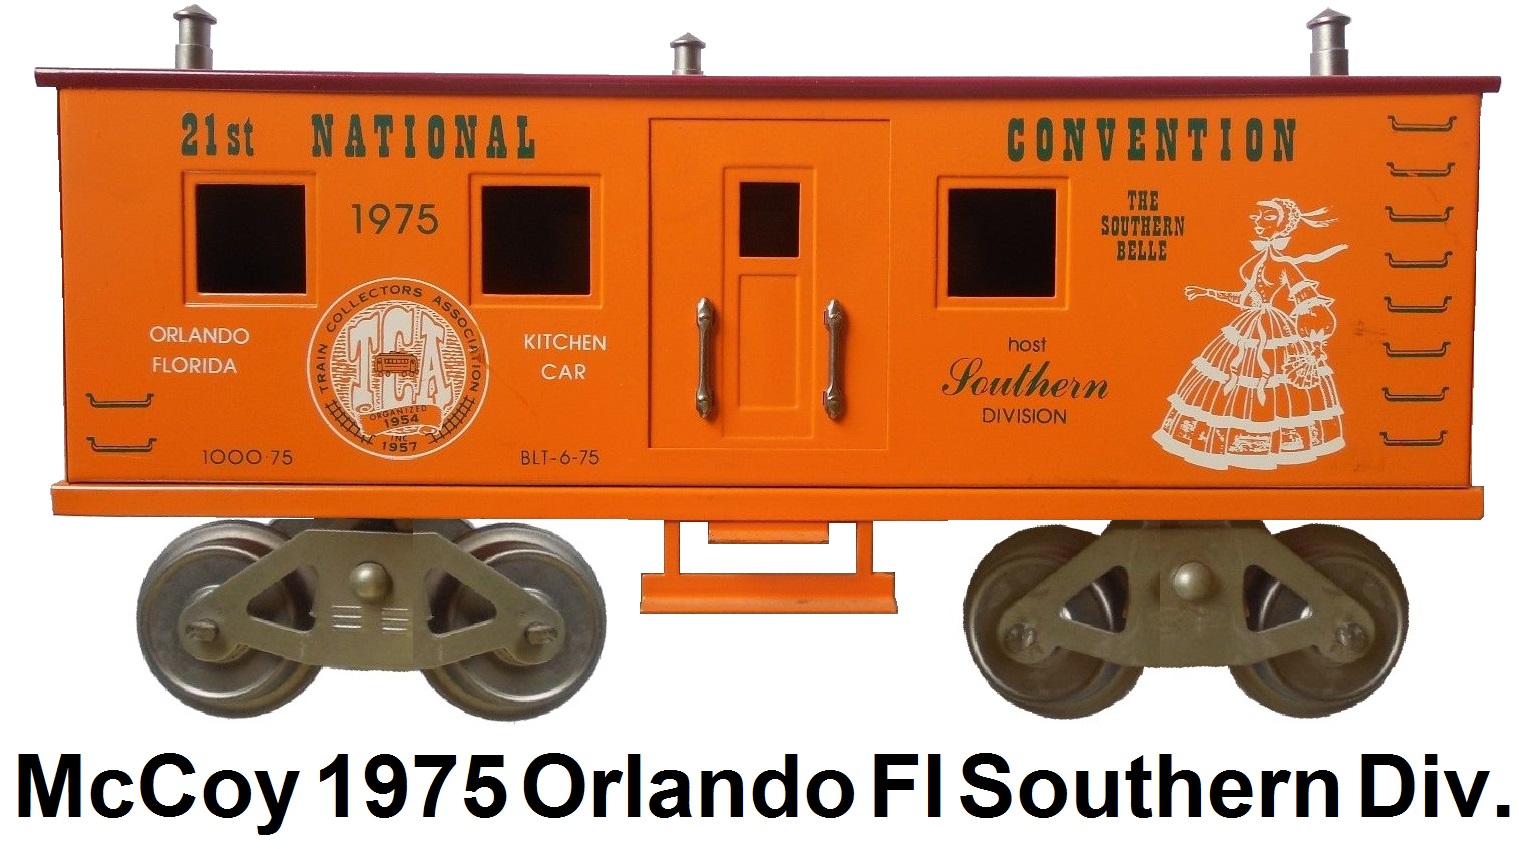 McCoy 1975 21st TCA Convention Standard gauge kitchen car representing the Southern Division in Orlando Florida